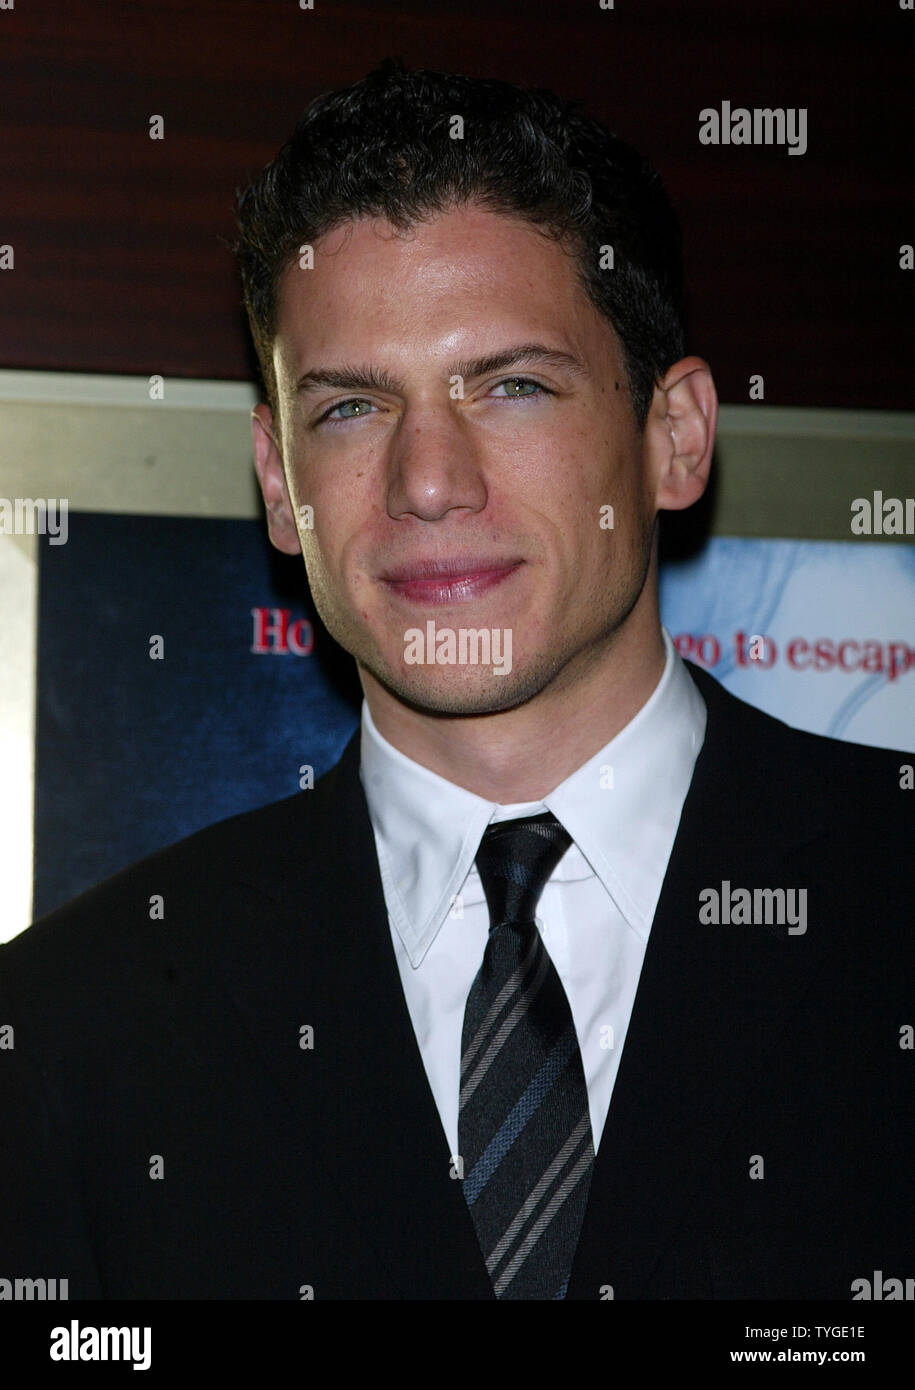 Wentworth Miller poses for pictures at the special screening for his new film 'The Human Stain' at the MGM Screening Room in New York on October 23, 2003.   (UPI/LAURA CAVANAUGH) Stock Photo